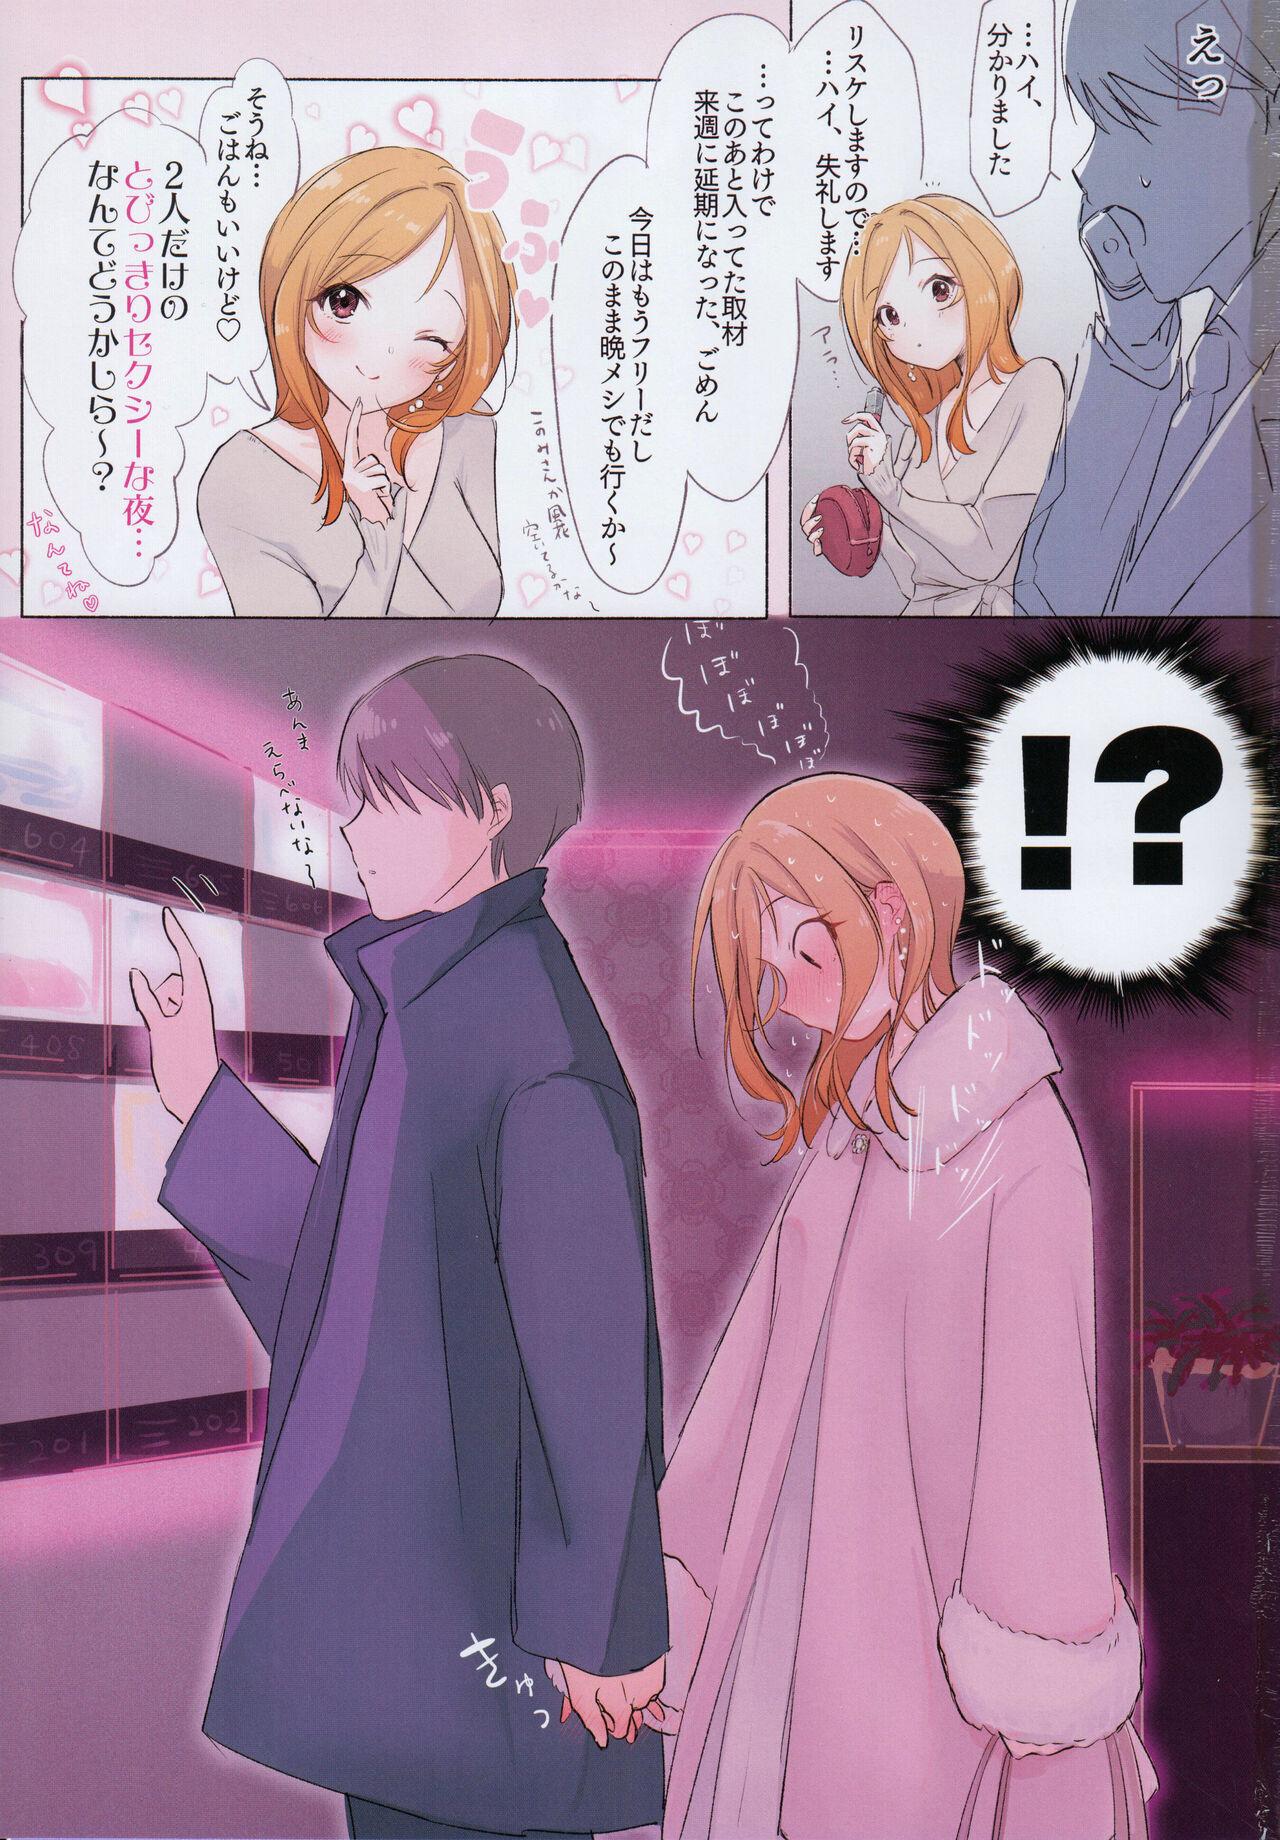 Dad By the way, Producer-kun, what do people do at a love hotel? - The idolmaster For - Page 2